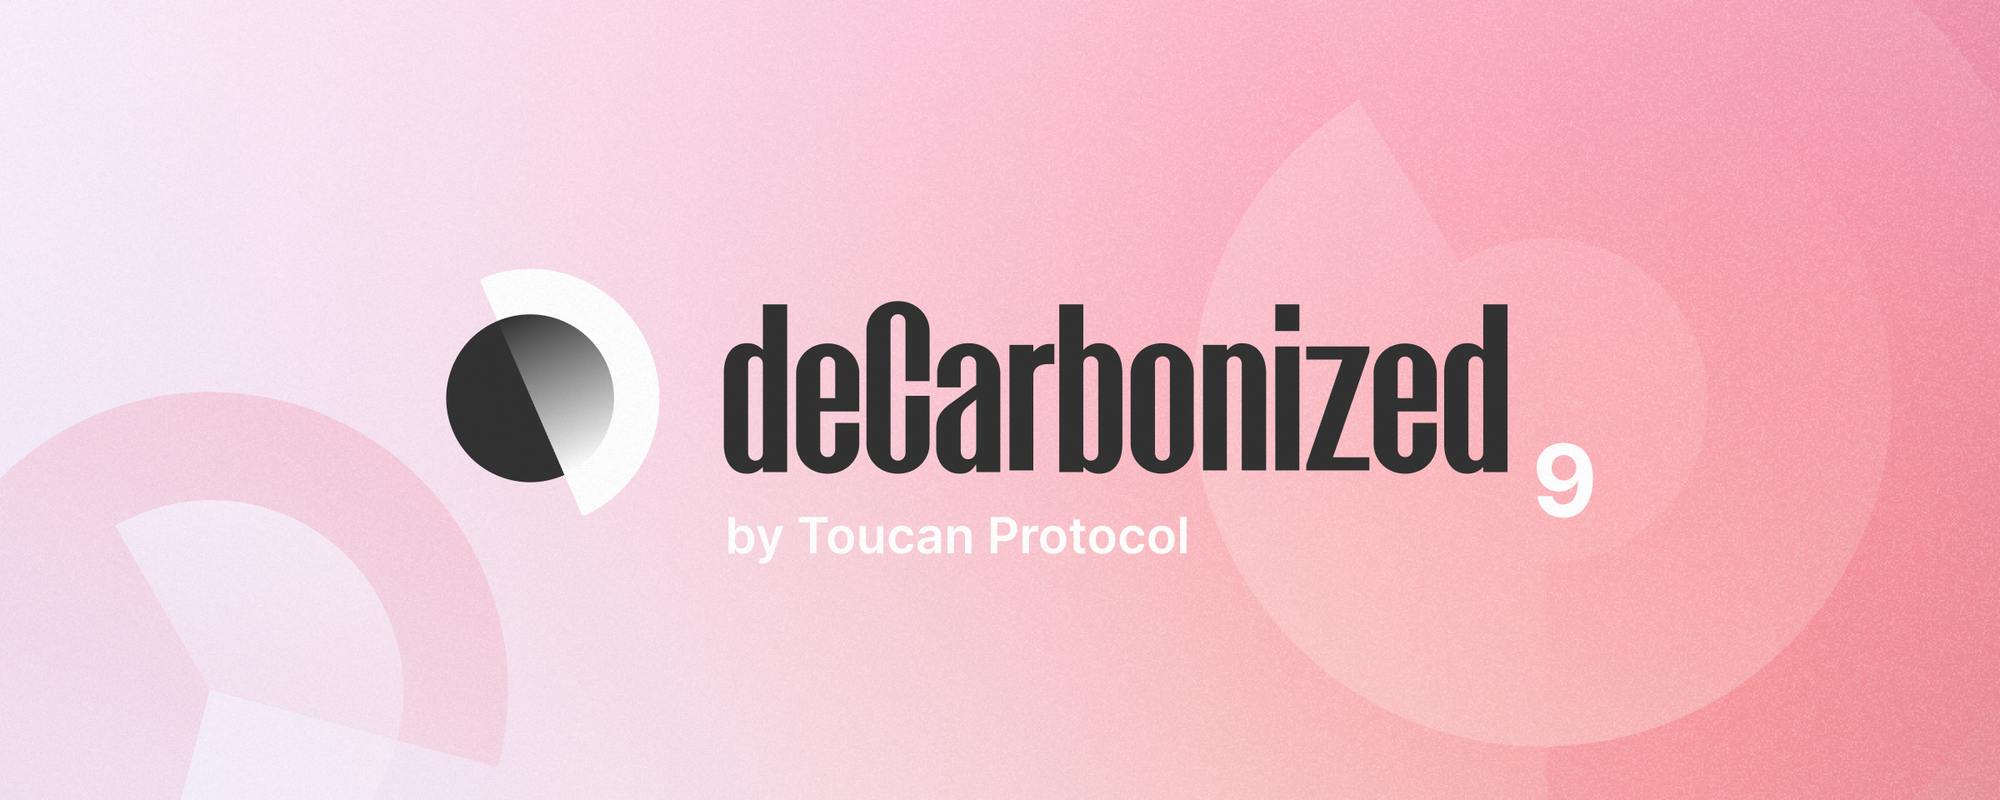 deCarbonized #9: Gender equality, improving co-benefit requirements, Microsoft carbon removal insights